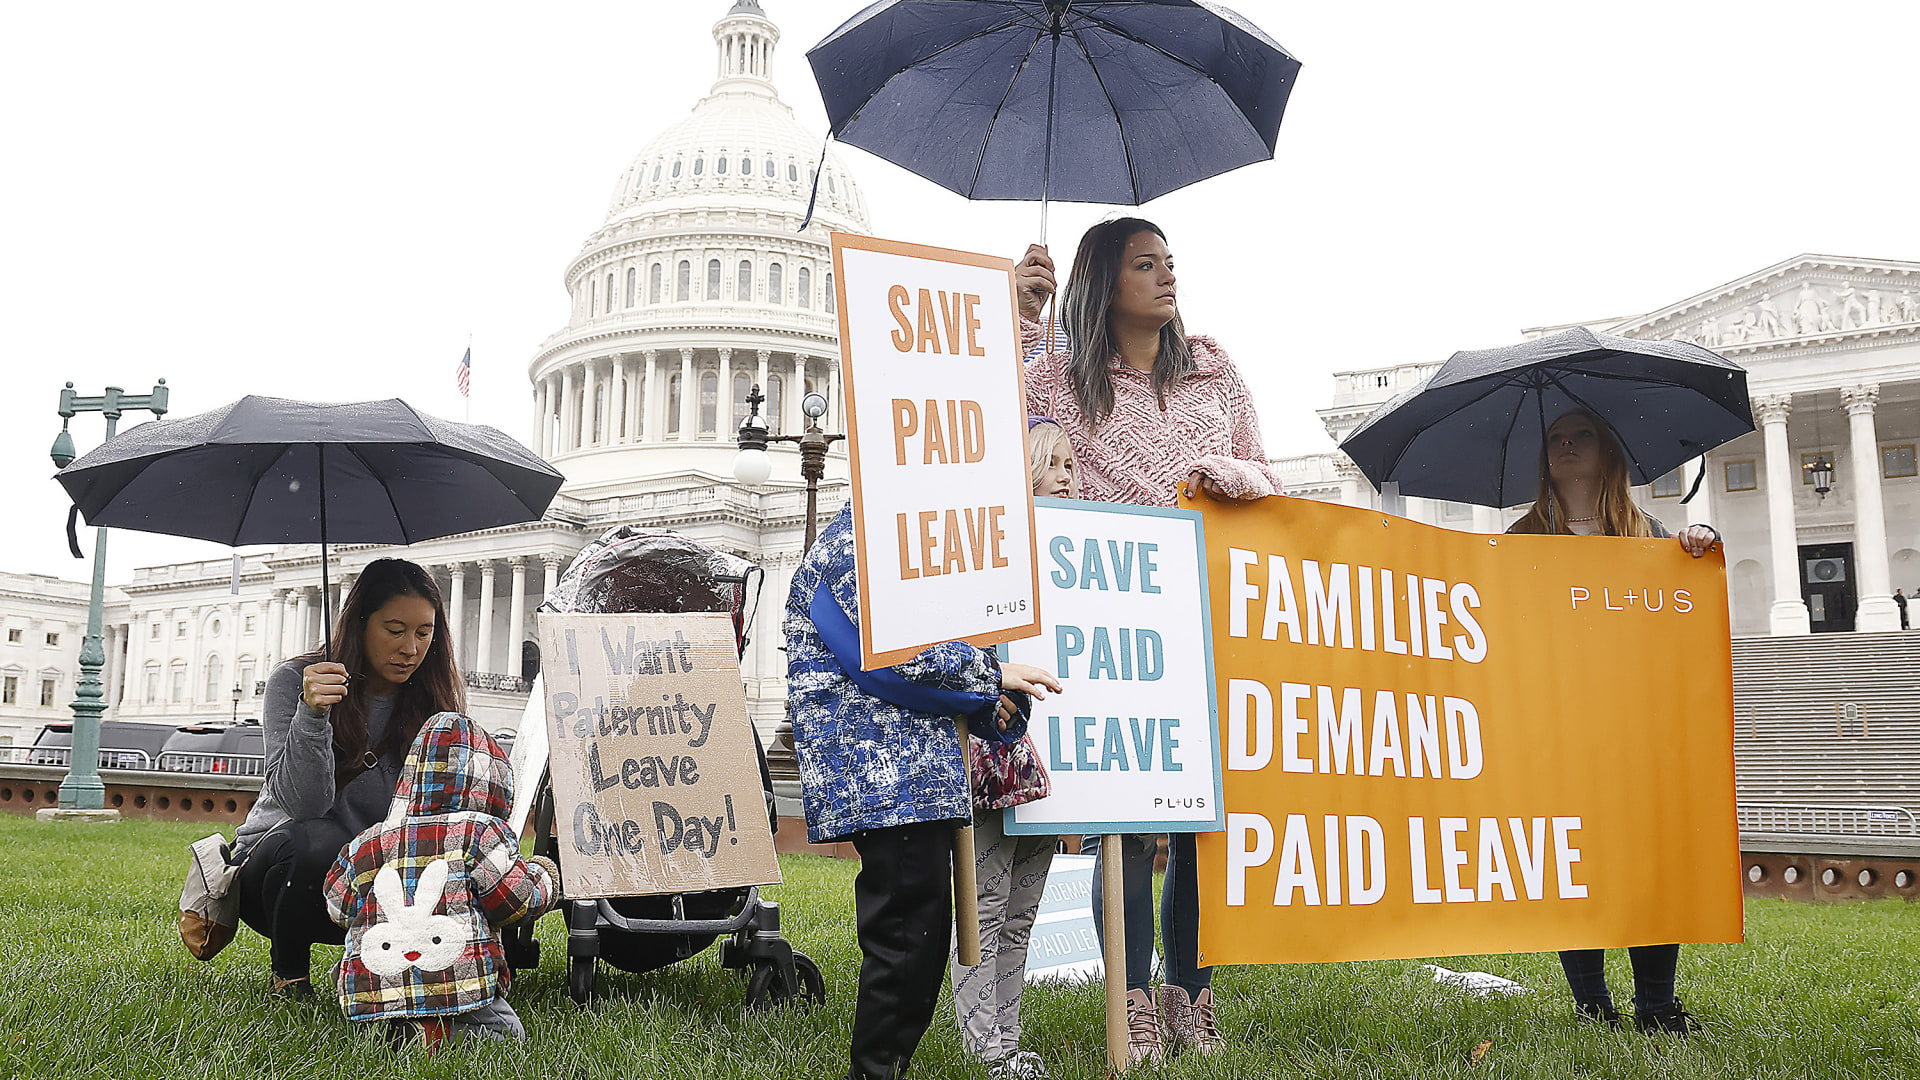 U.S. workers lost about $28 billion in wages during Covid-19 due to lack of access to paid leave, report finds